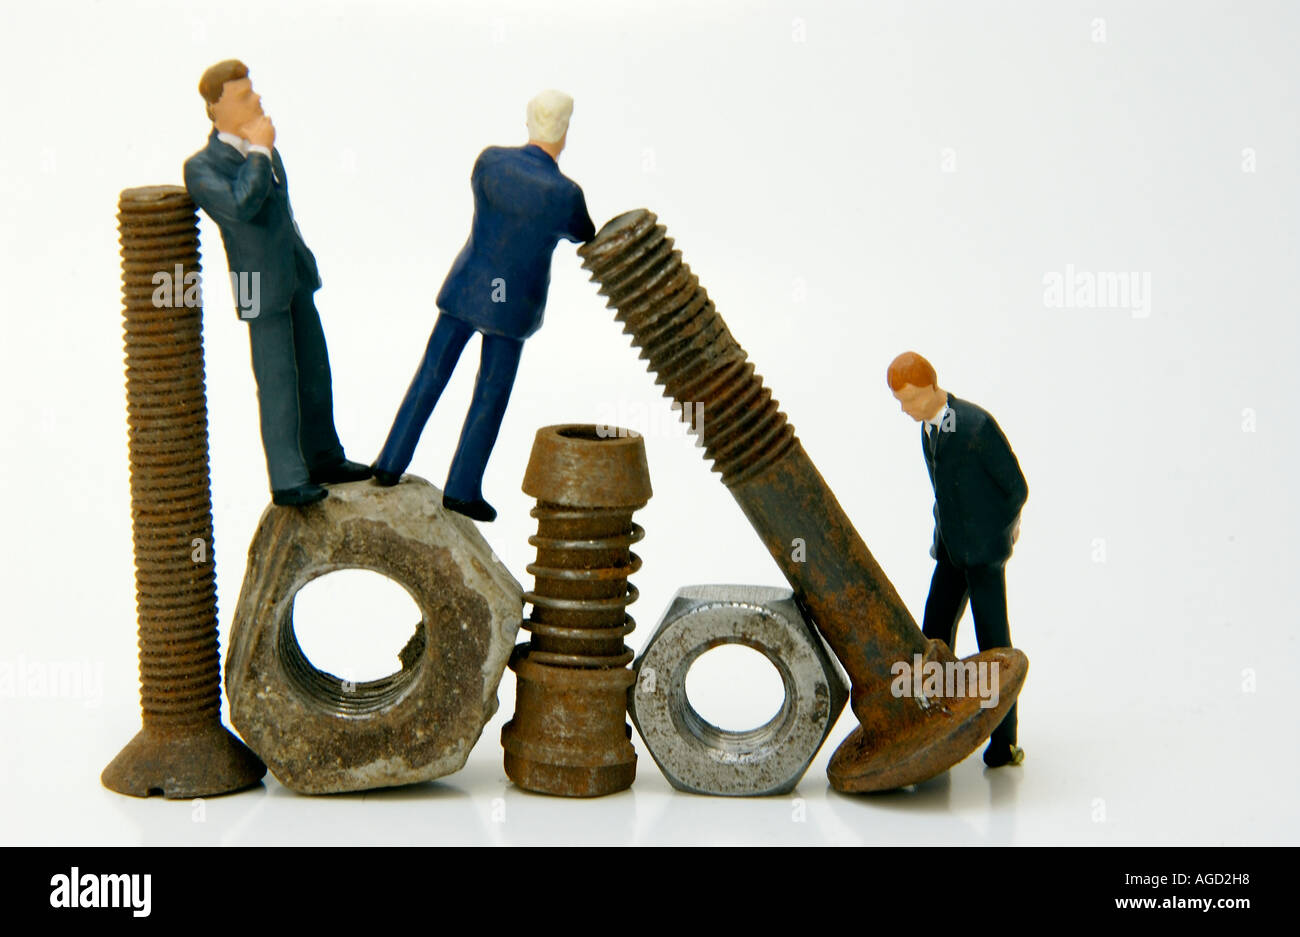 Economy / manufacturing / industry / industrial / innovation concept - business figures thinking Stock Photo